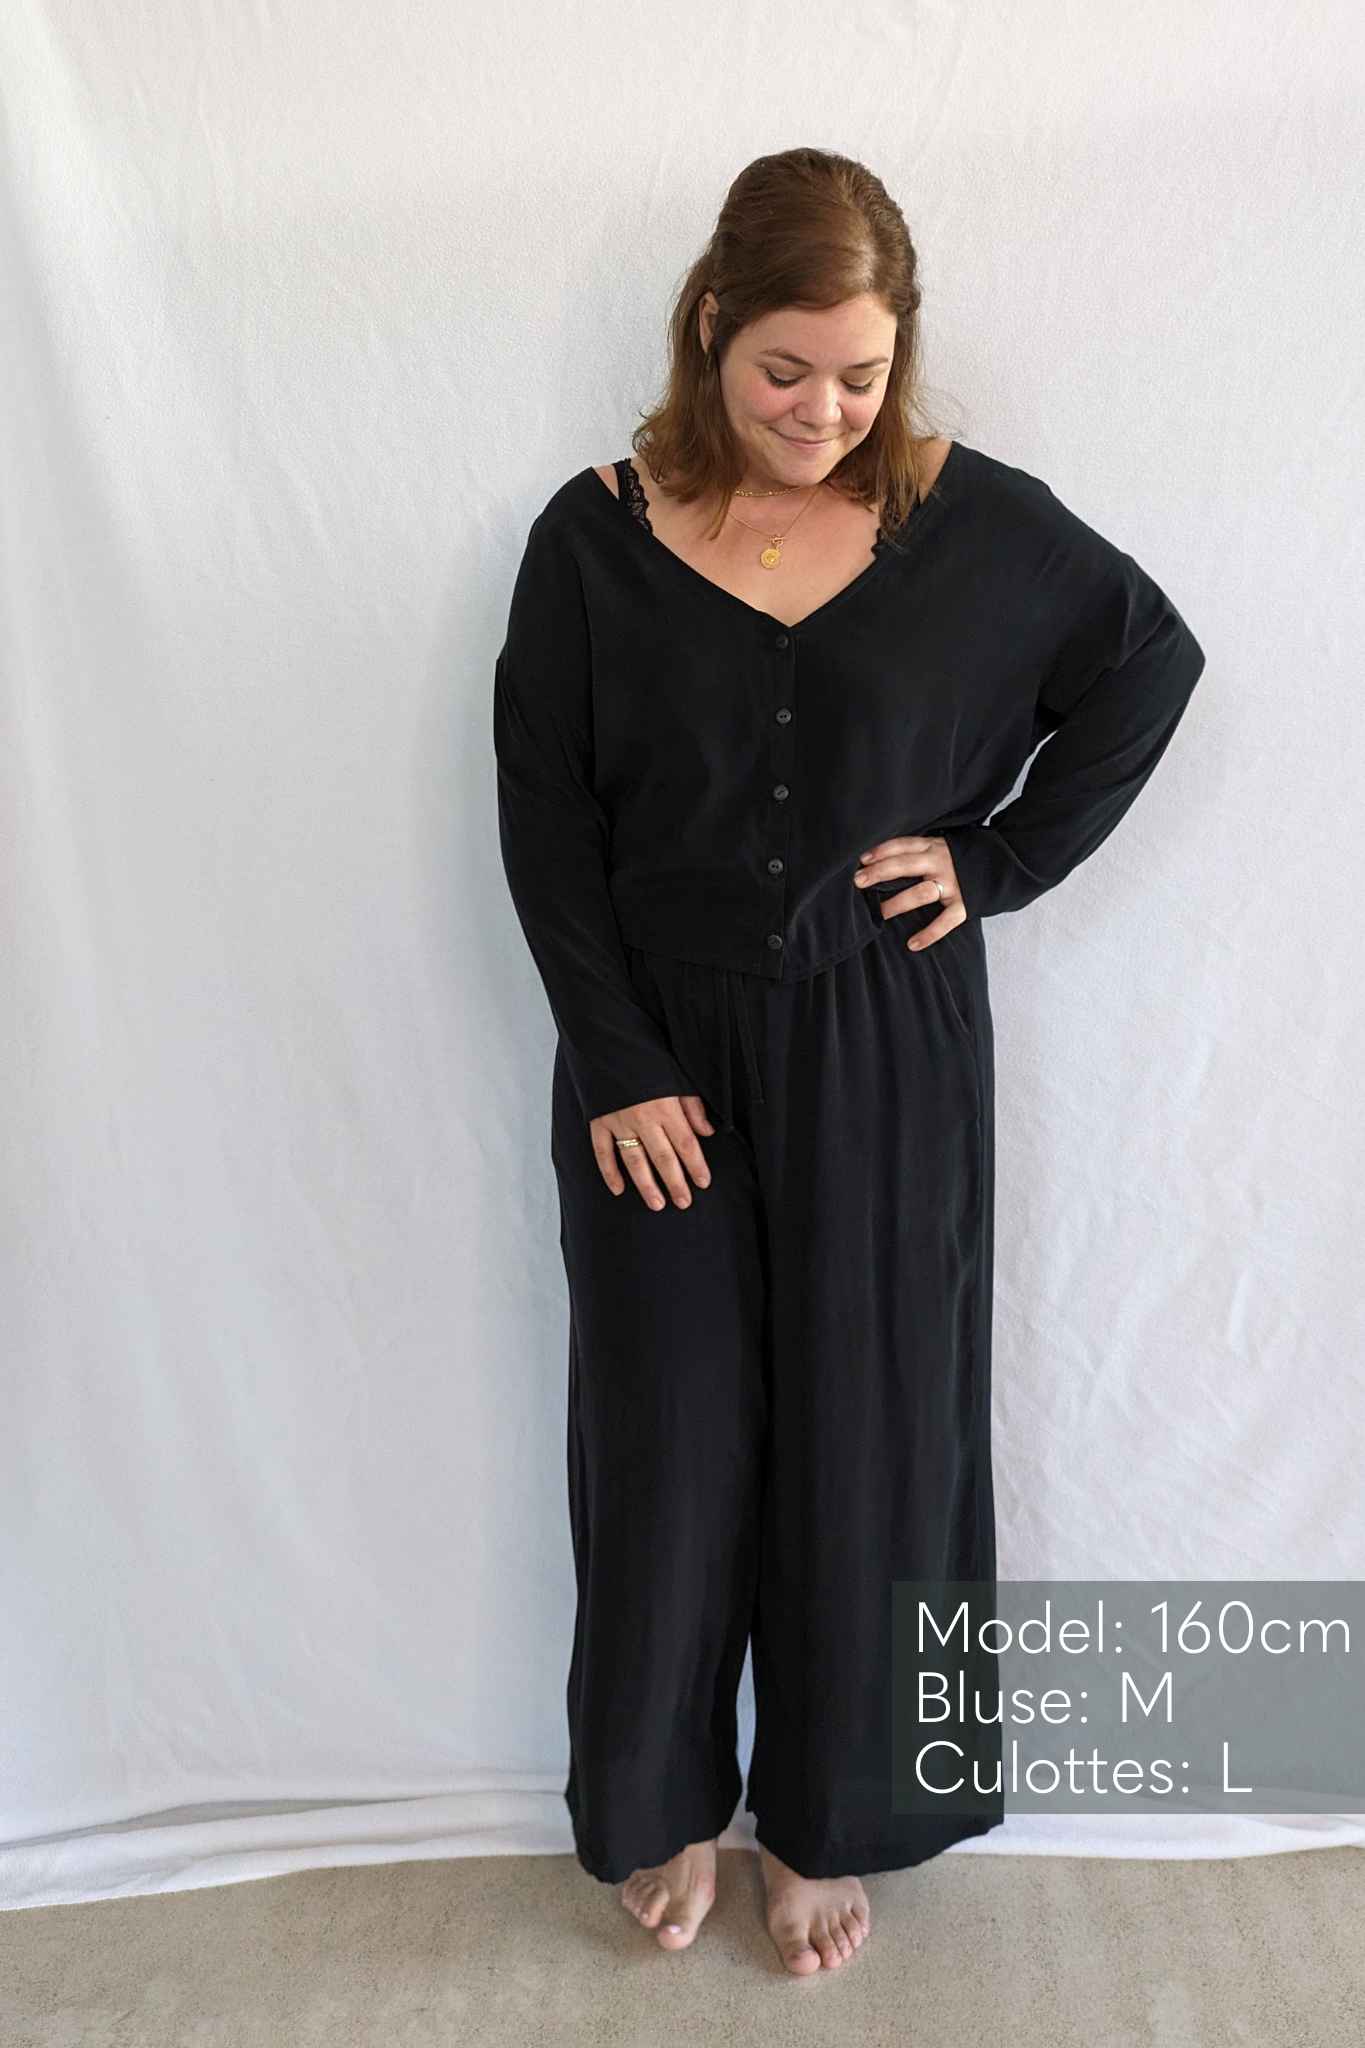 Person wears black pyjamas with small buttons down the front.